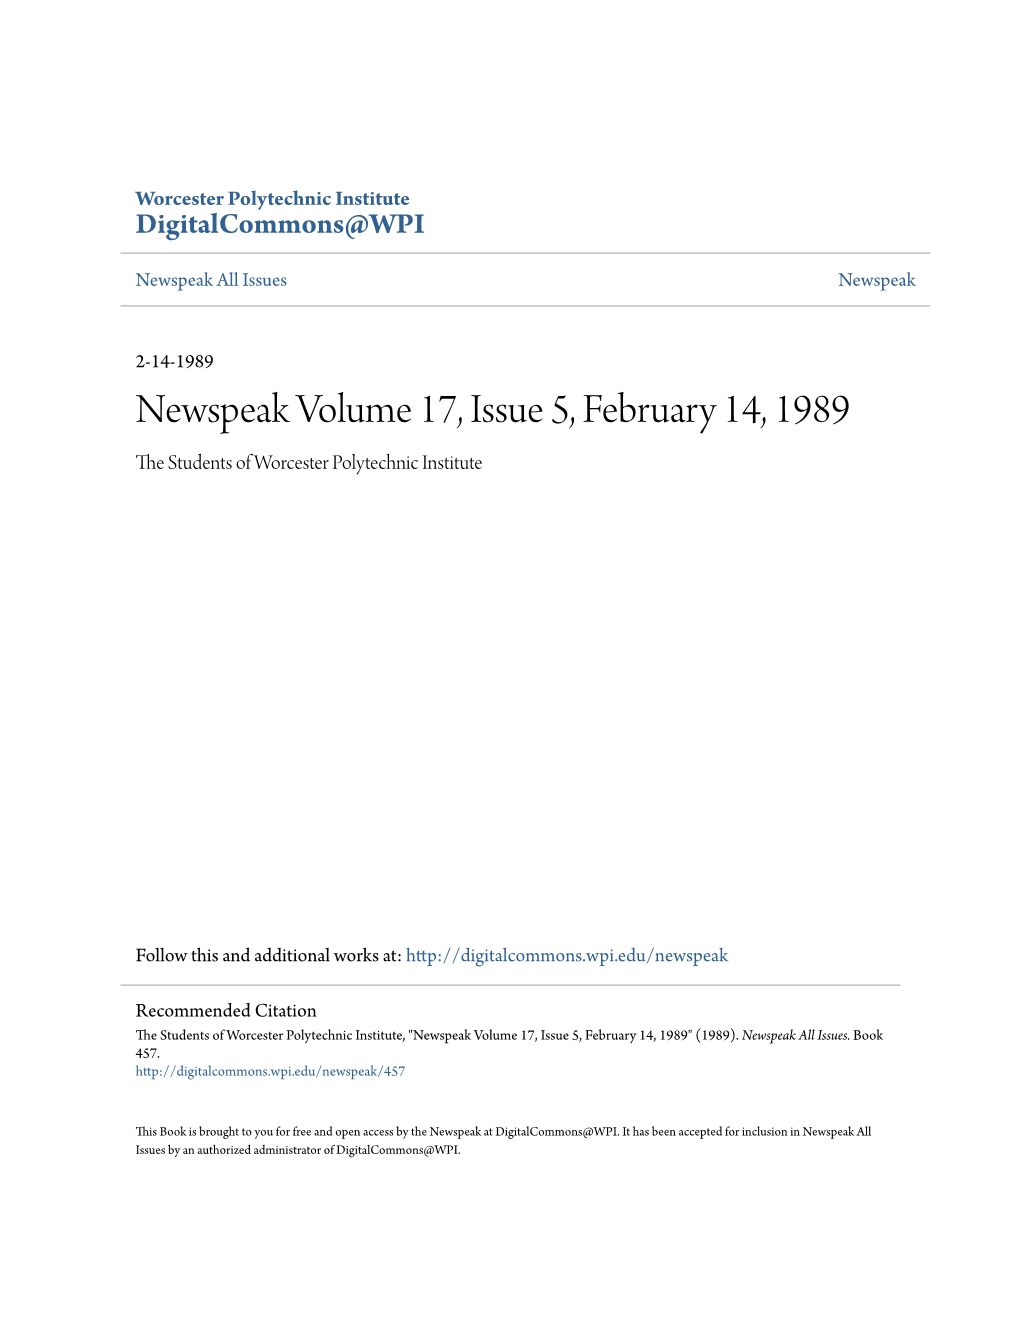 Newspeak Volume 17, Issue 5, February 14, 1989 the Tudes Nts of Worcester Polytechnic Institute